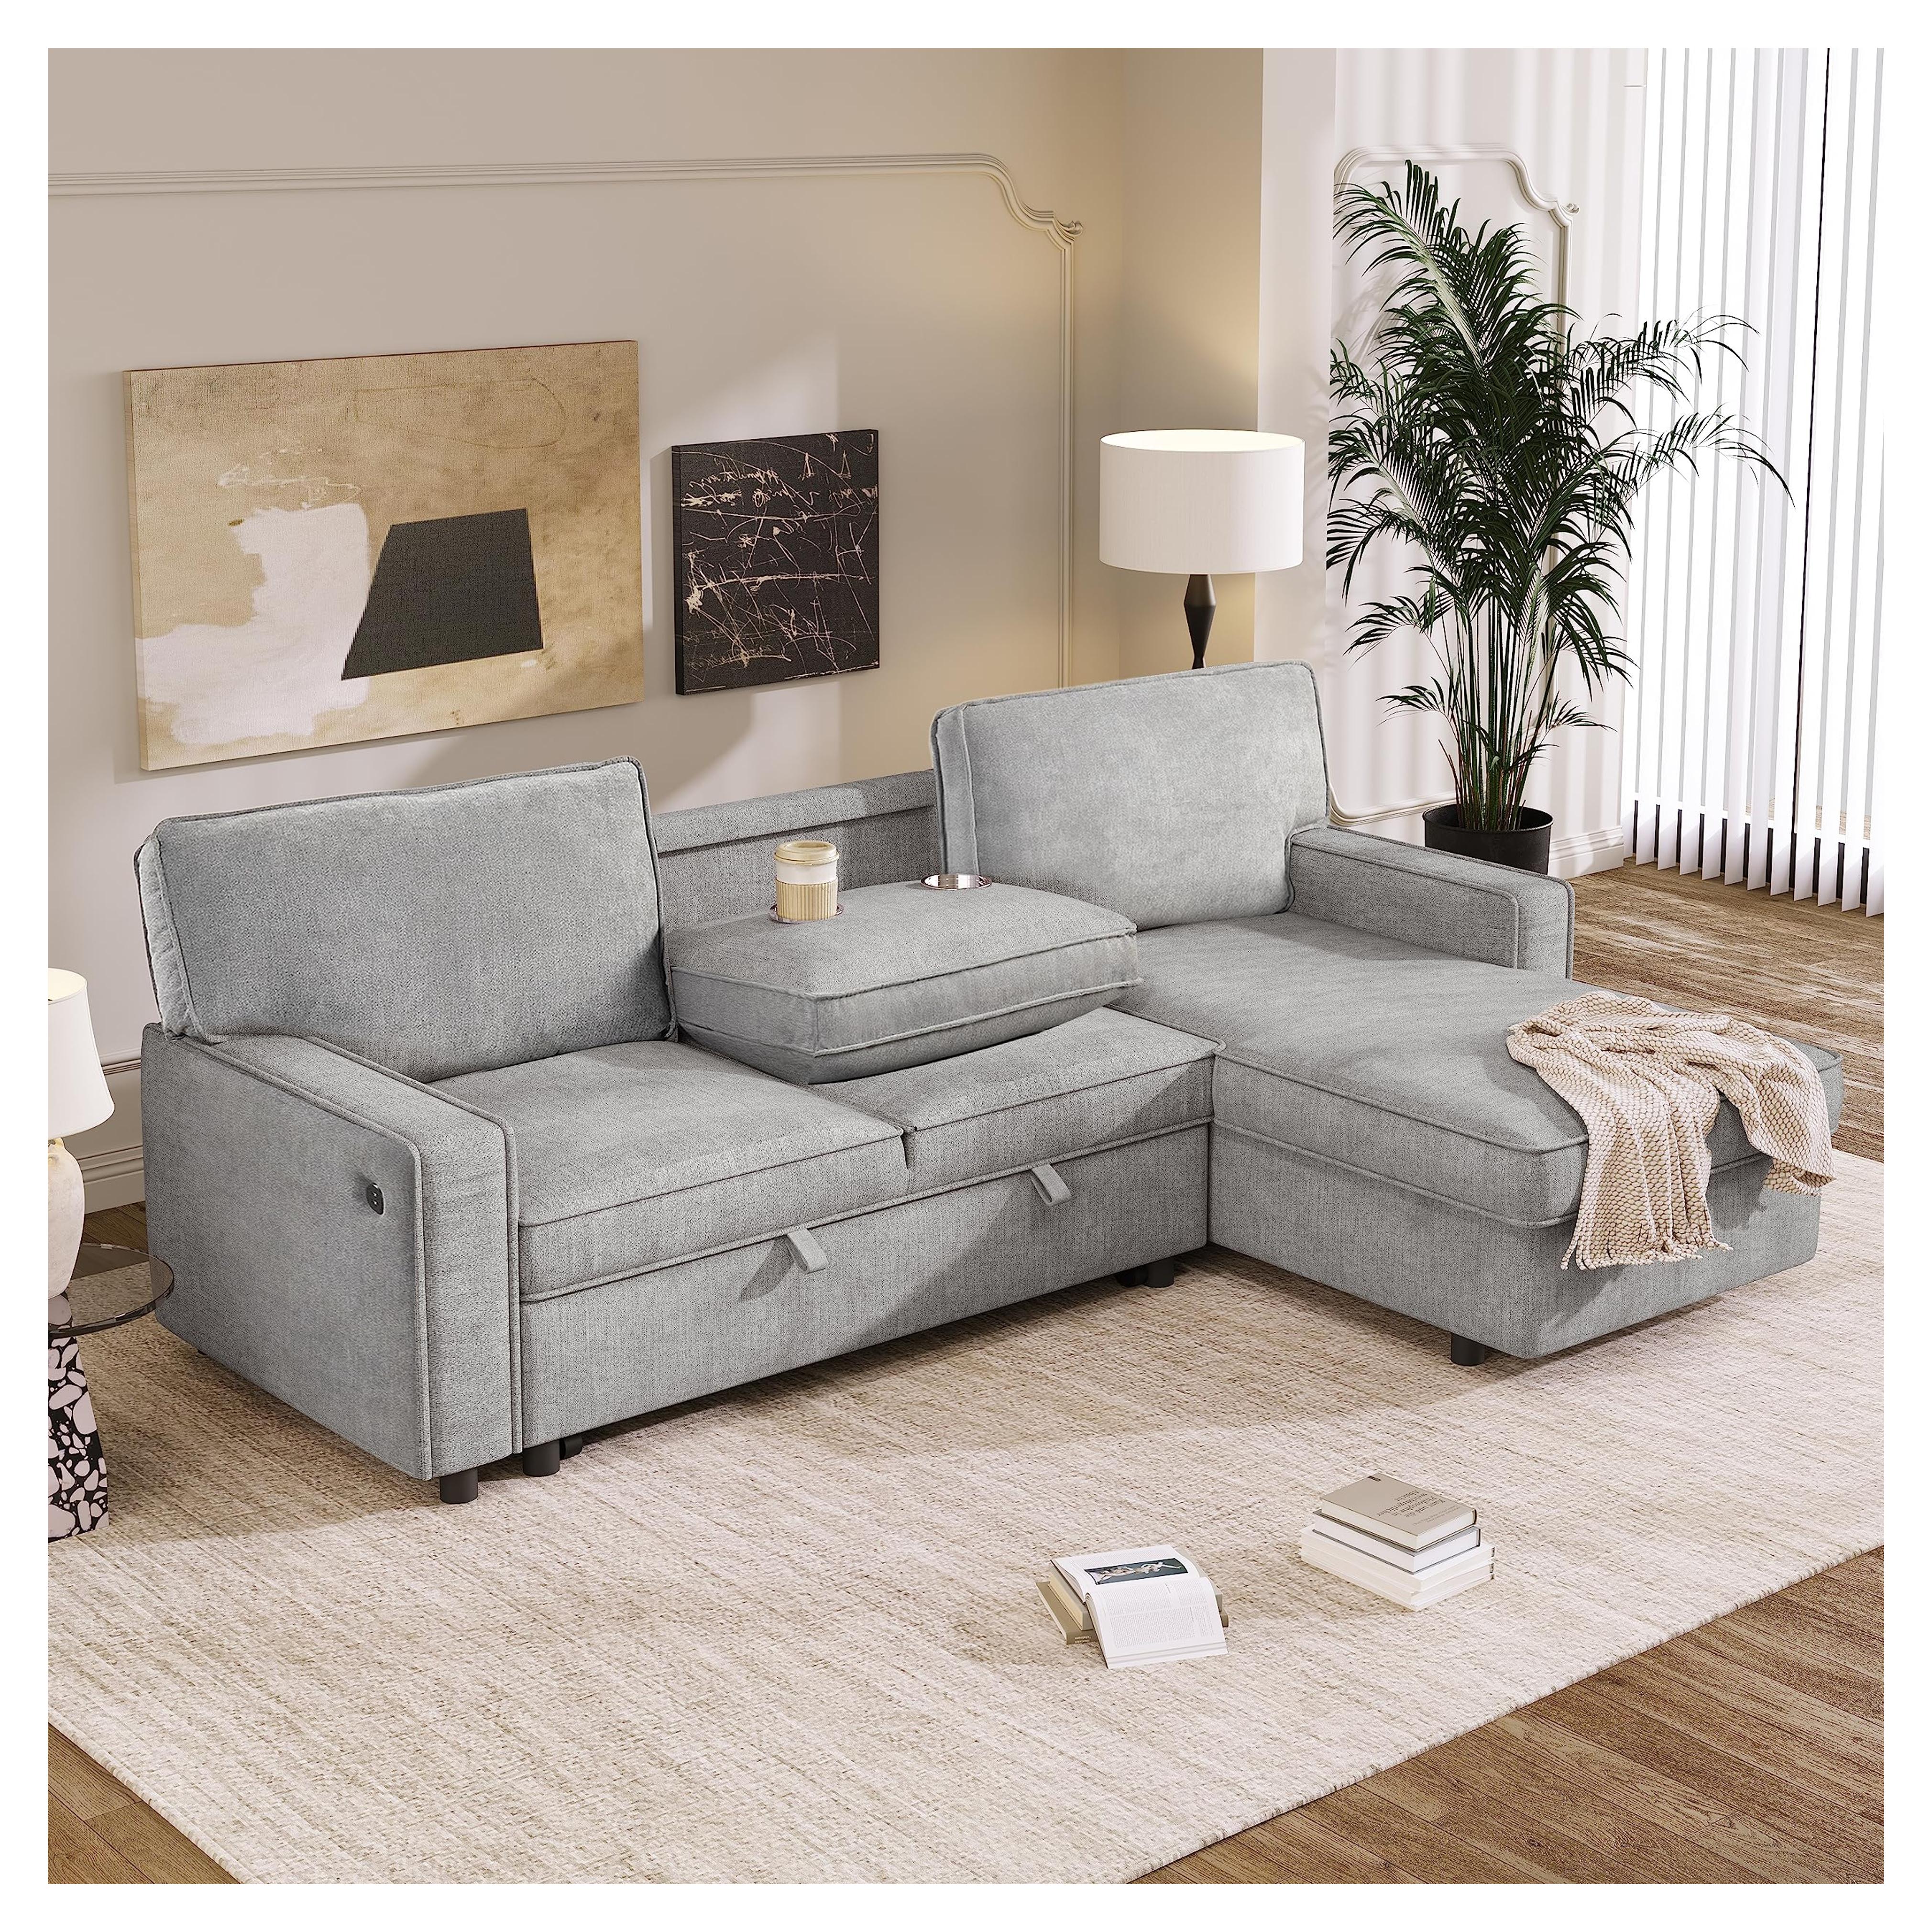 Amazon.com: 89" Upholstery Sleeper Sectional Sofa with Storage Space, USB Port, 2 Cup Holders on Back Cushions : Home & Kitchen